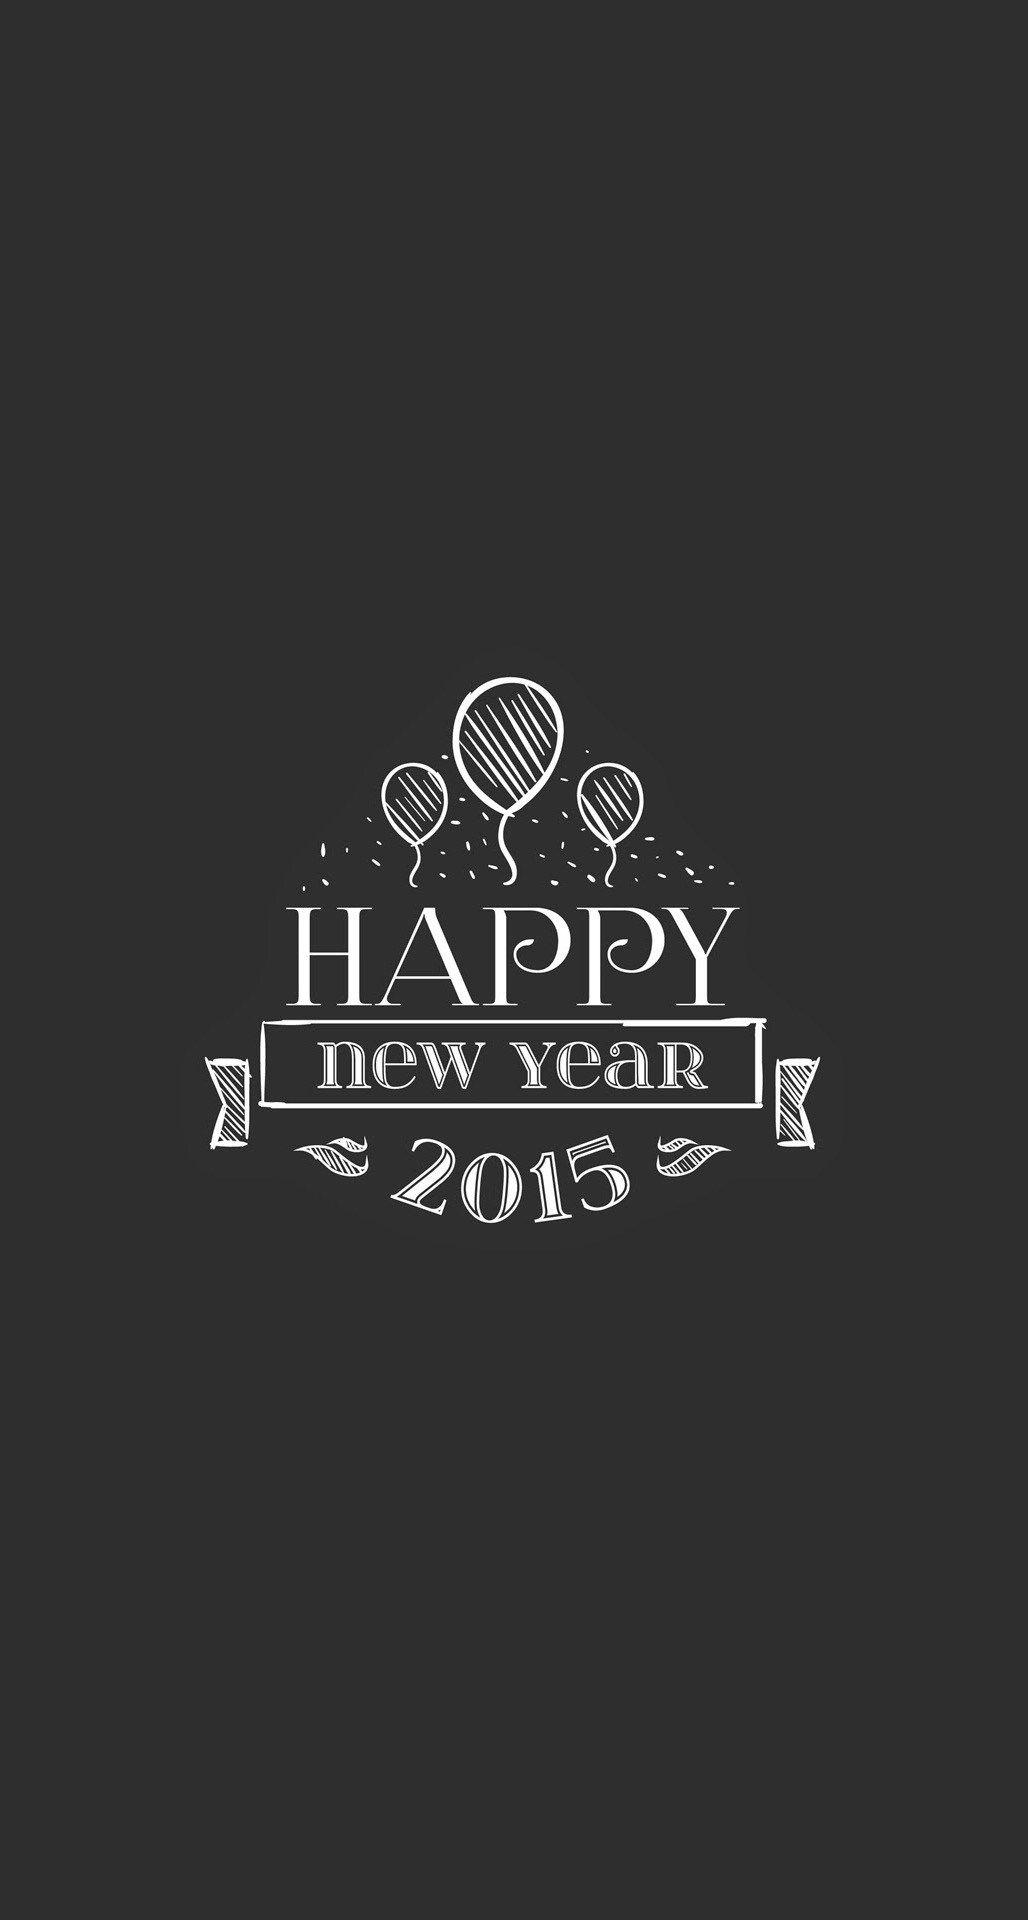 Download Happy New year HD Wallpaper for iPhone. Play Apps For PC